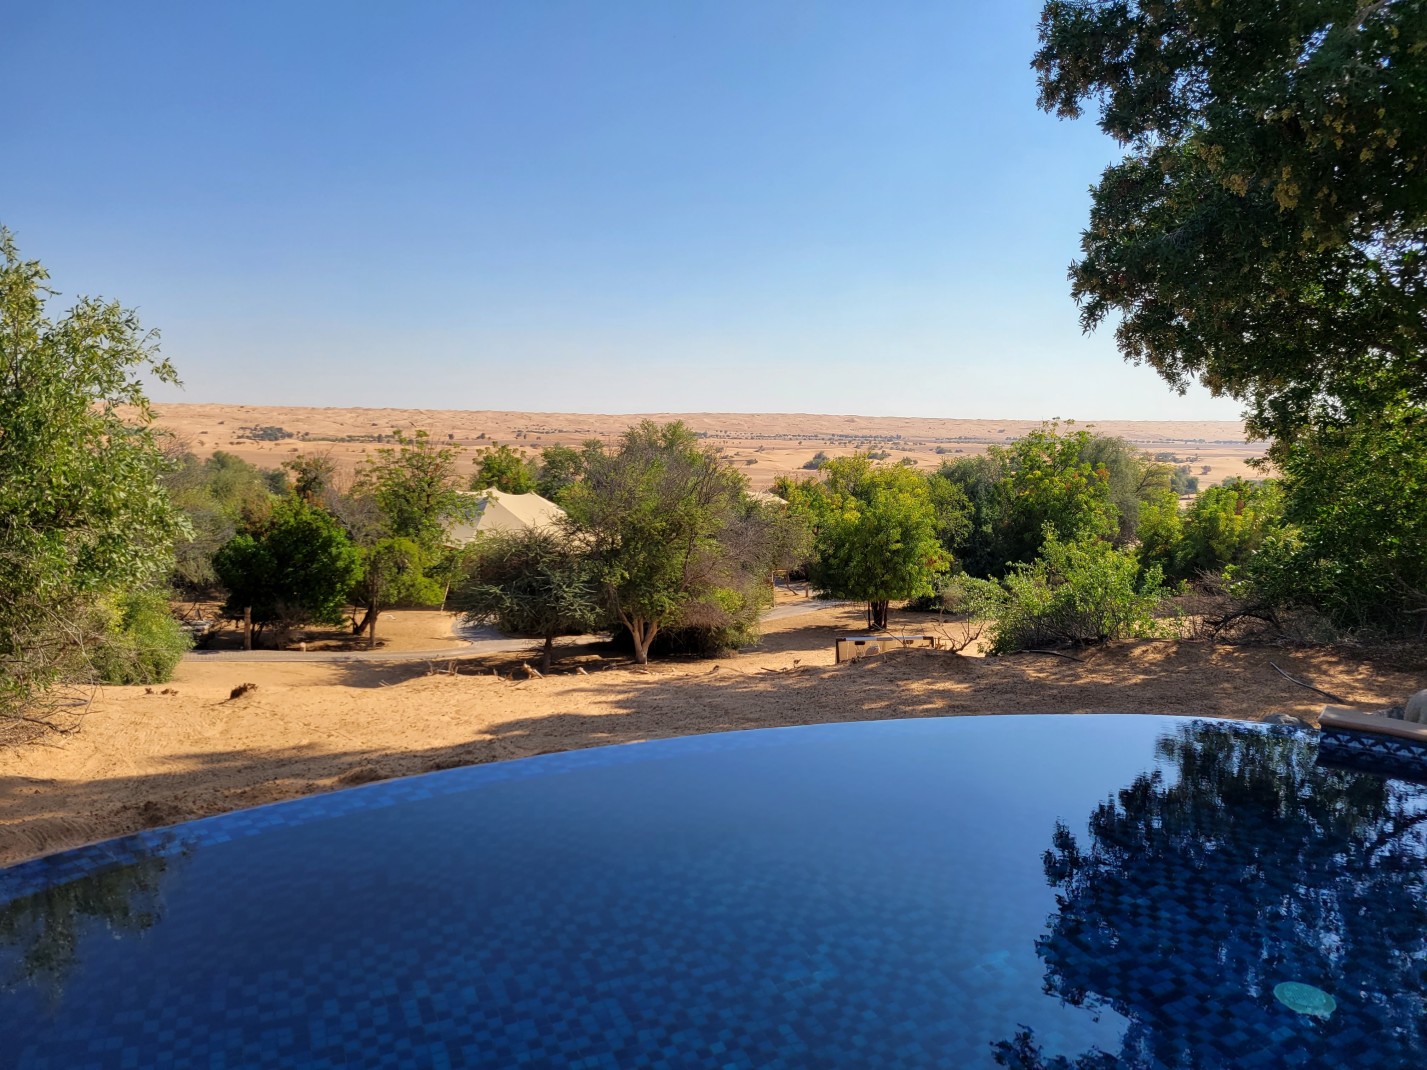 Desert views in the UAE with a blue infinity pool overlooking tan sand and green trees.